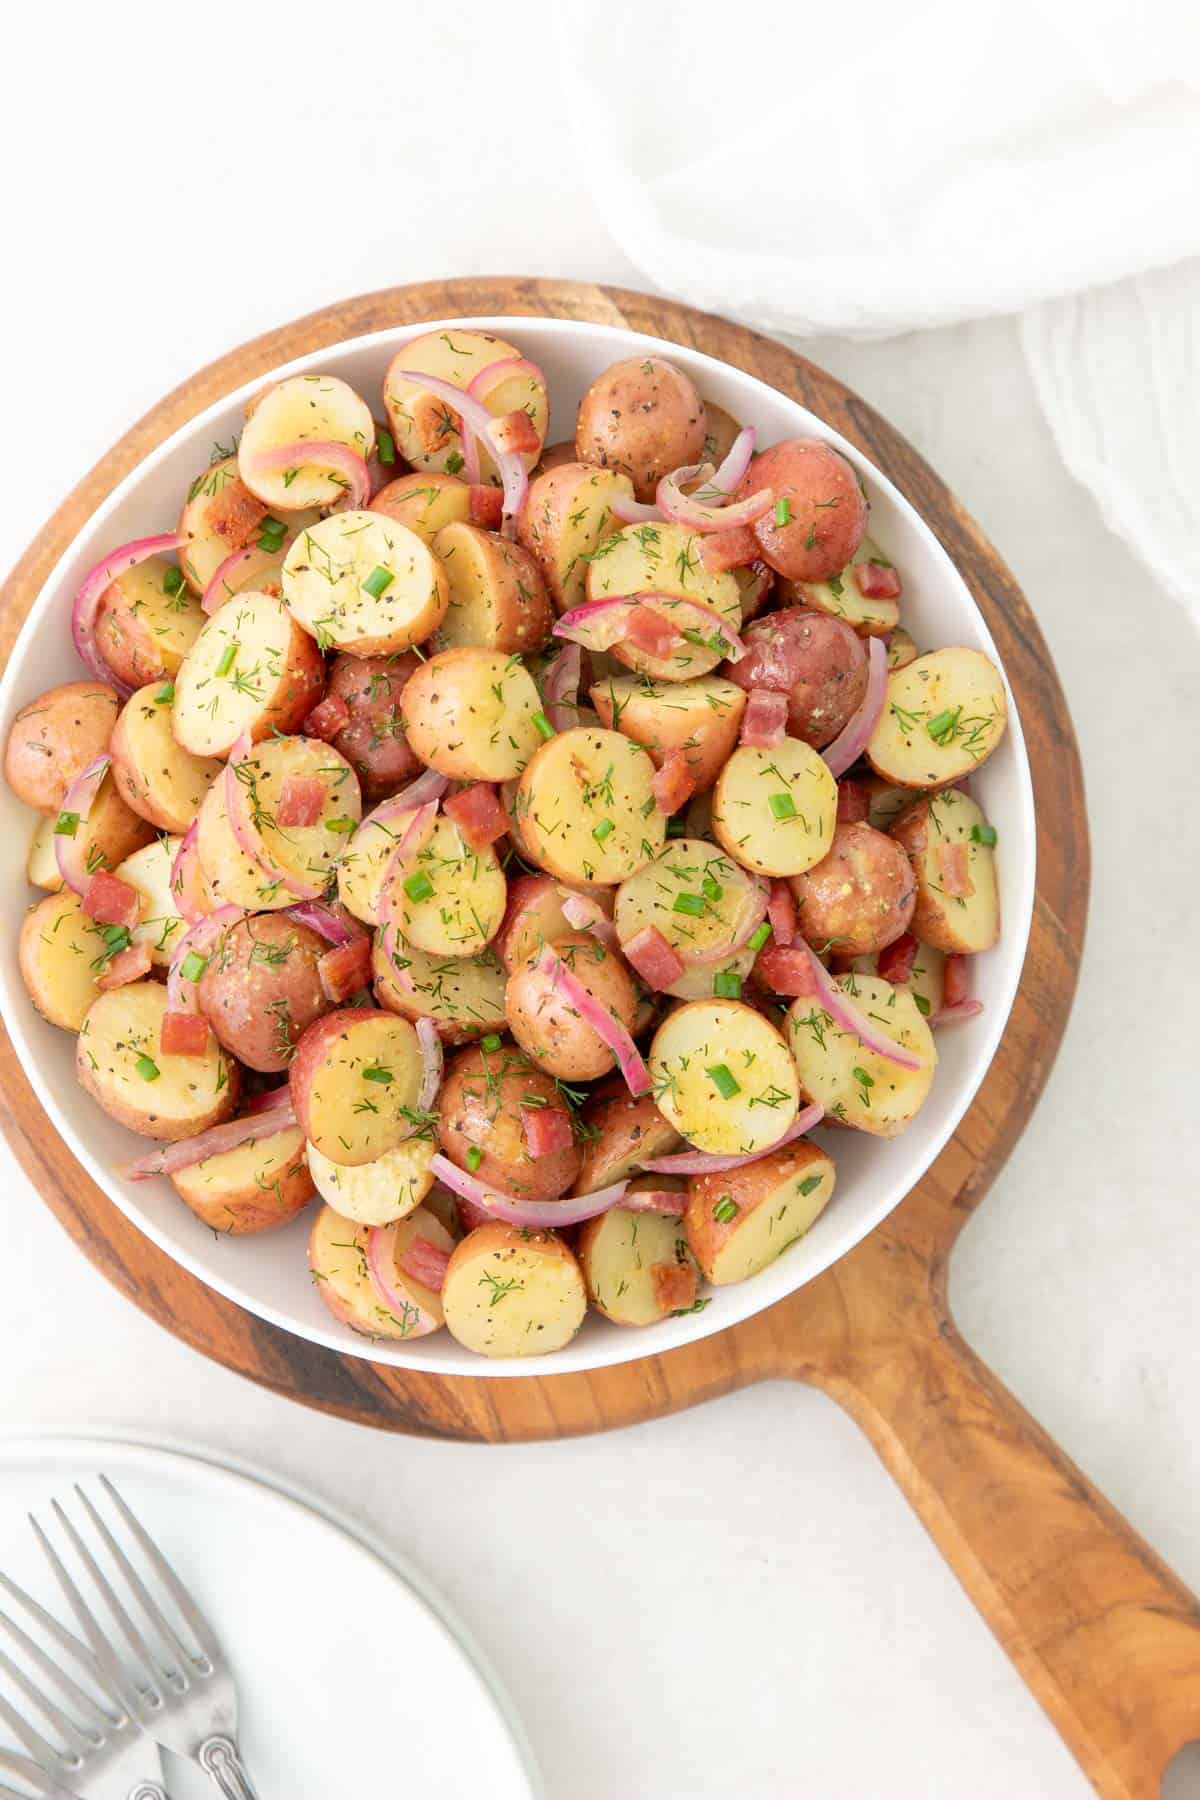 Overhead view of warm potato salad in a white bowl.